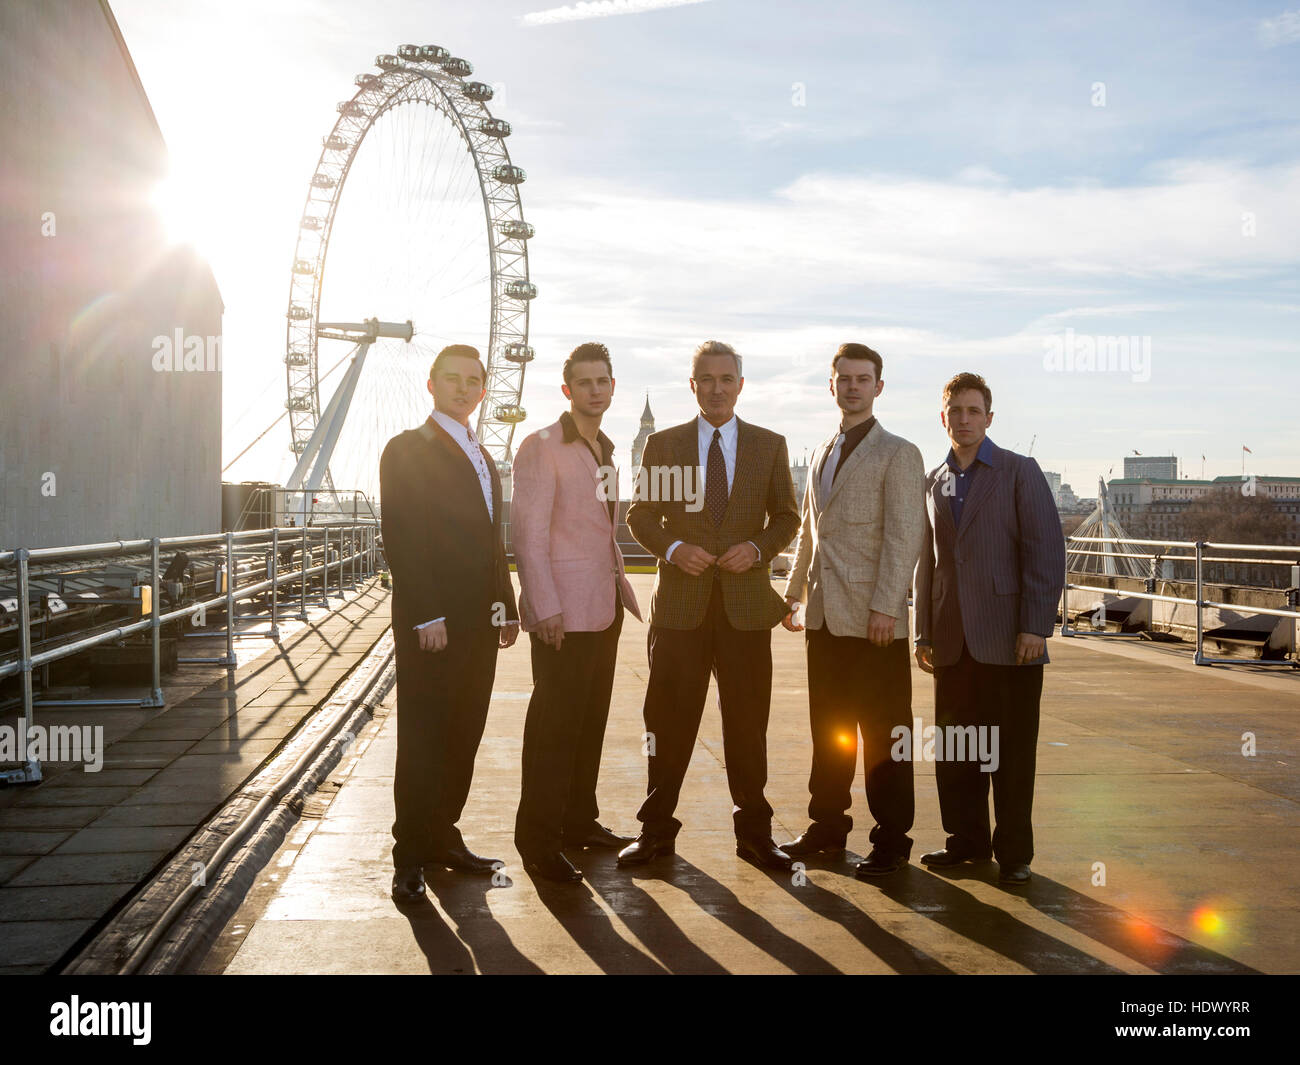 Photocall with Martin Kemp, formerly of Spandau Ballet, who stars in Million Dollar Quartet at the Royal Festival Hall in London until 2 January 2017. Stock Photo